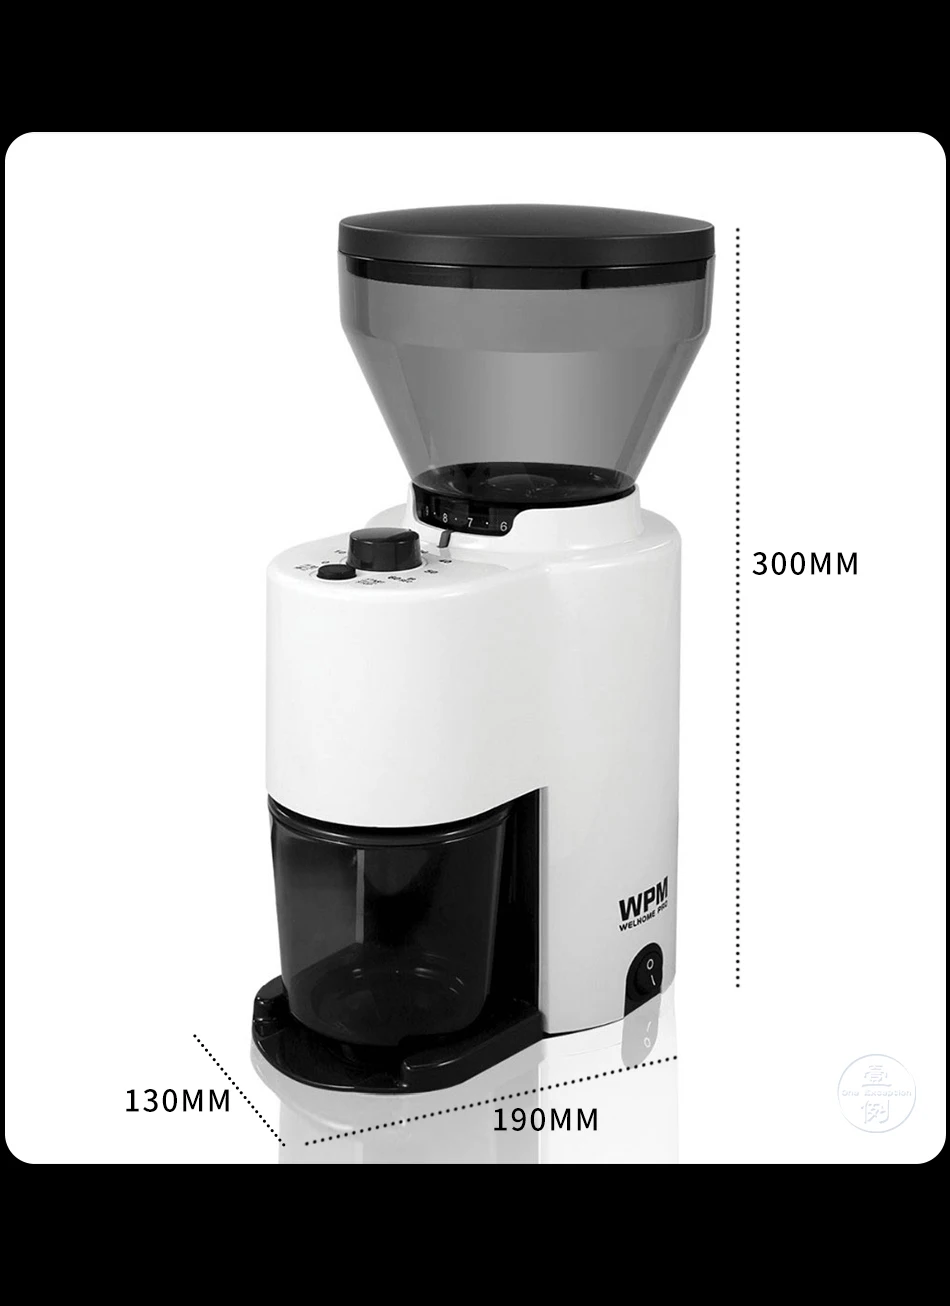 

Welhome/Huijia ZD-10T/ZD-10 Italian Hand Punch Household Electric Bean Grinder Coffee Grinder